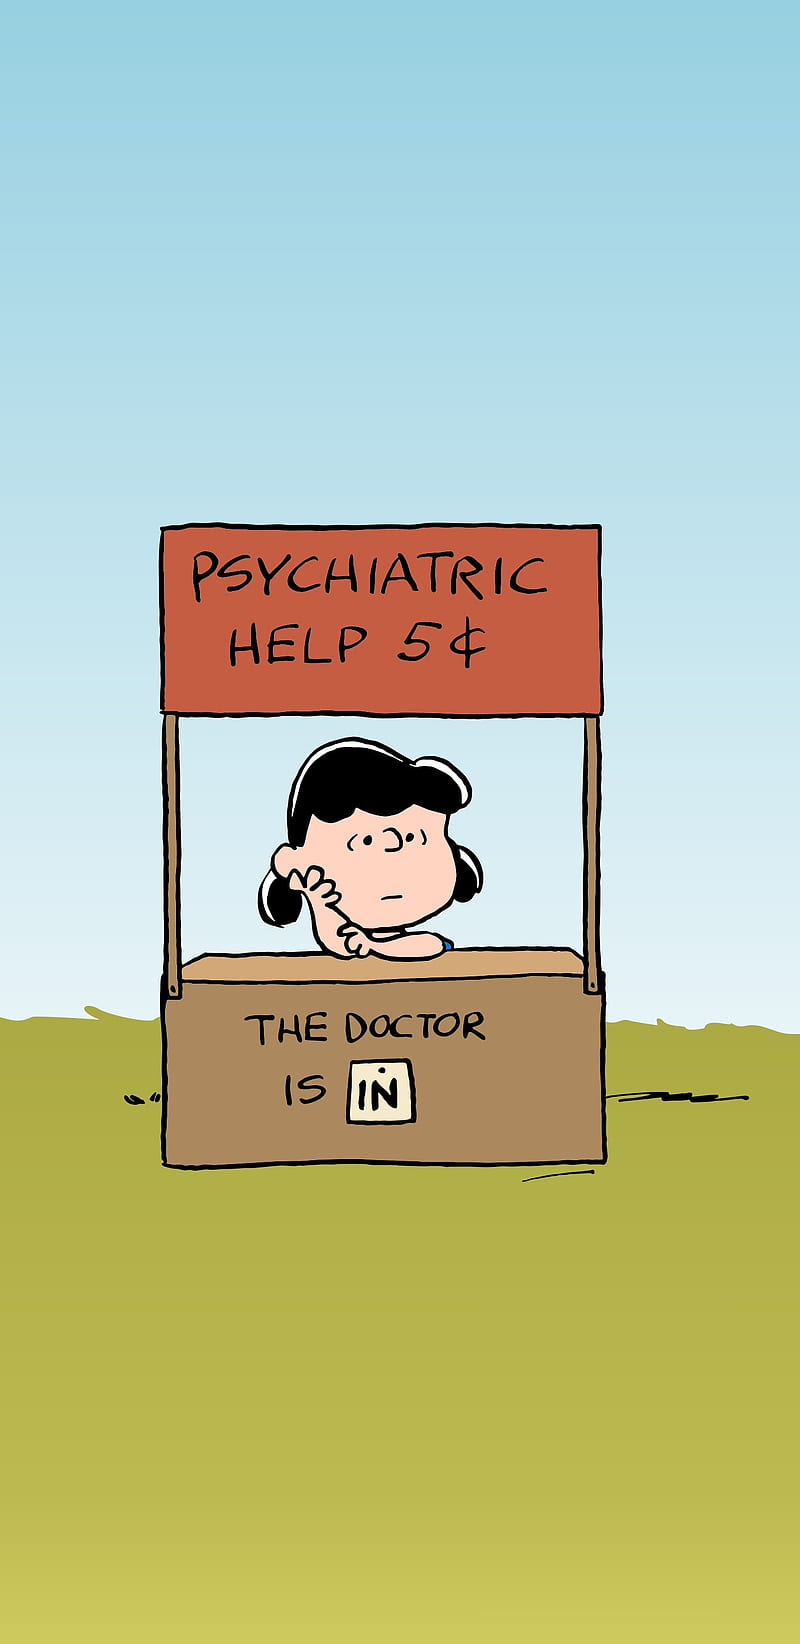 The Doctor Is In, charlie brown, help, lucy, peanuts, psychiatric, snoopy, steve chavez, wraitude, HD phone wallpaper